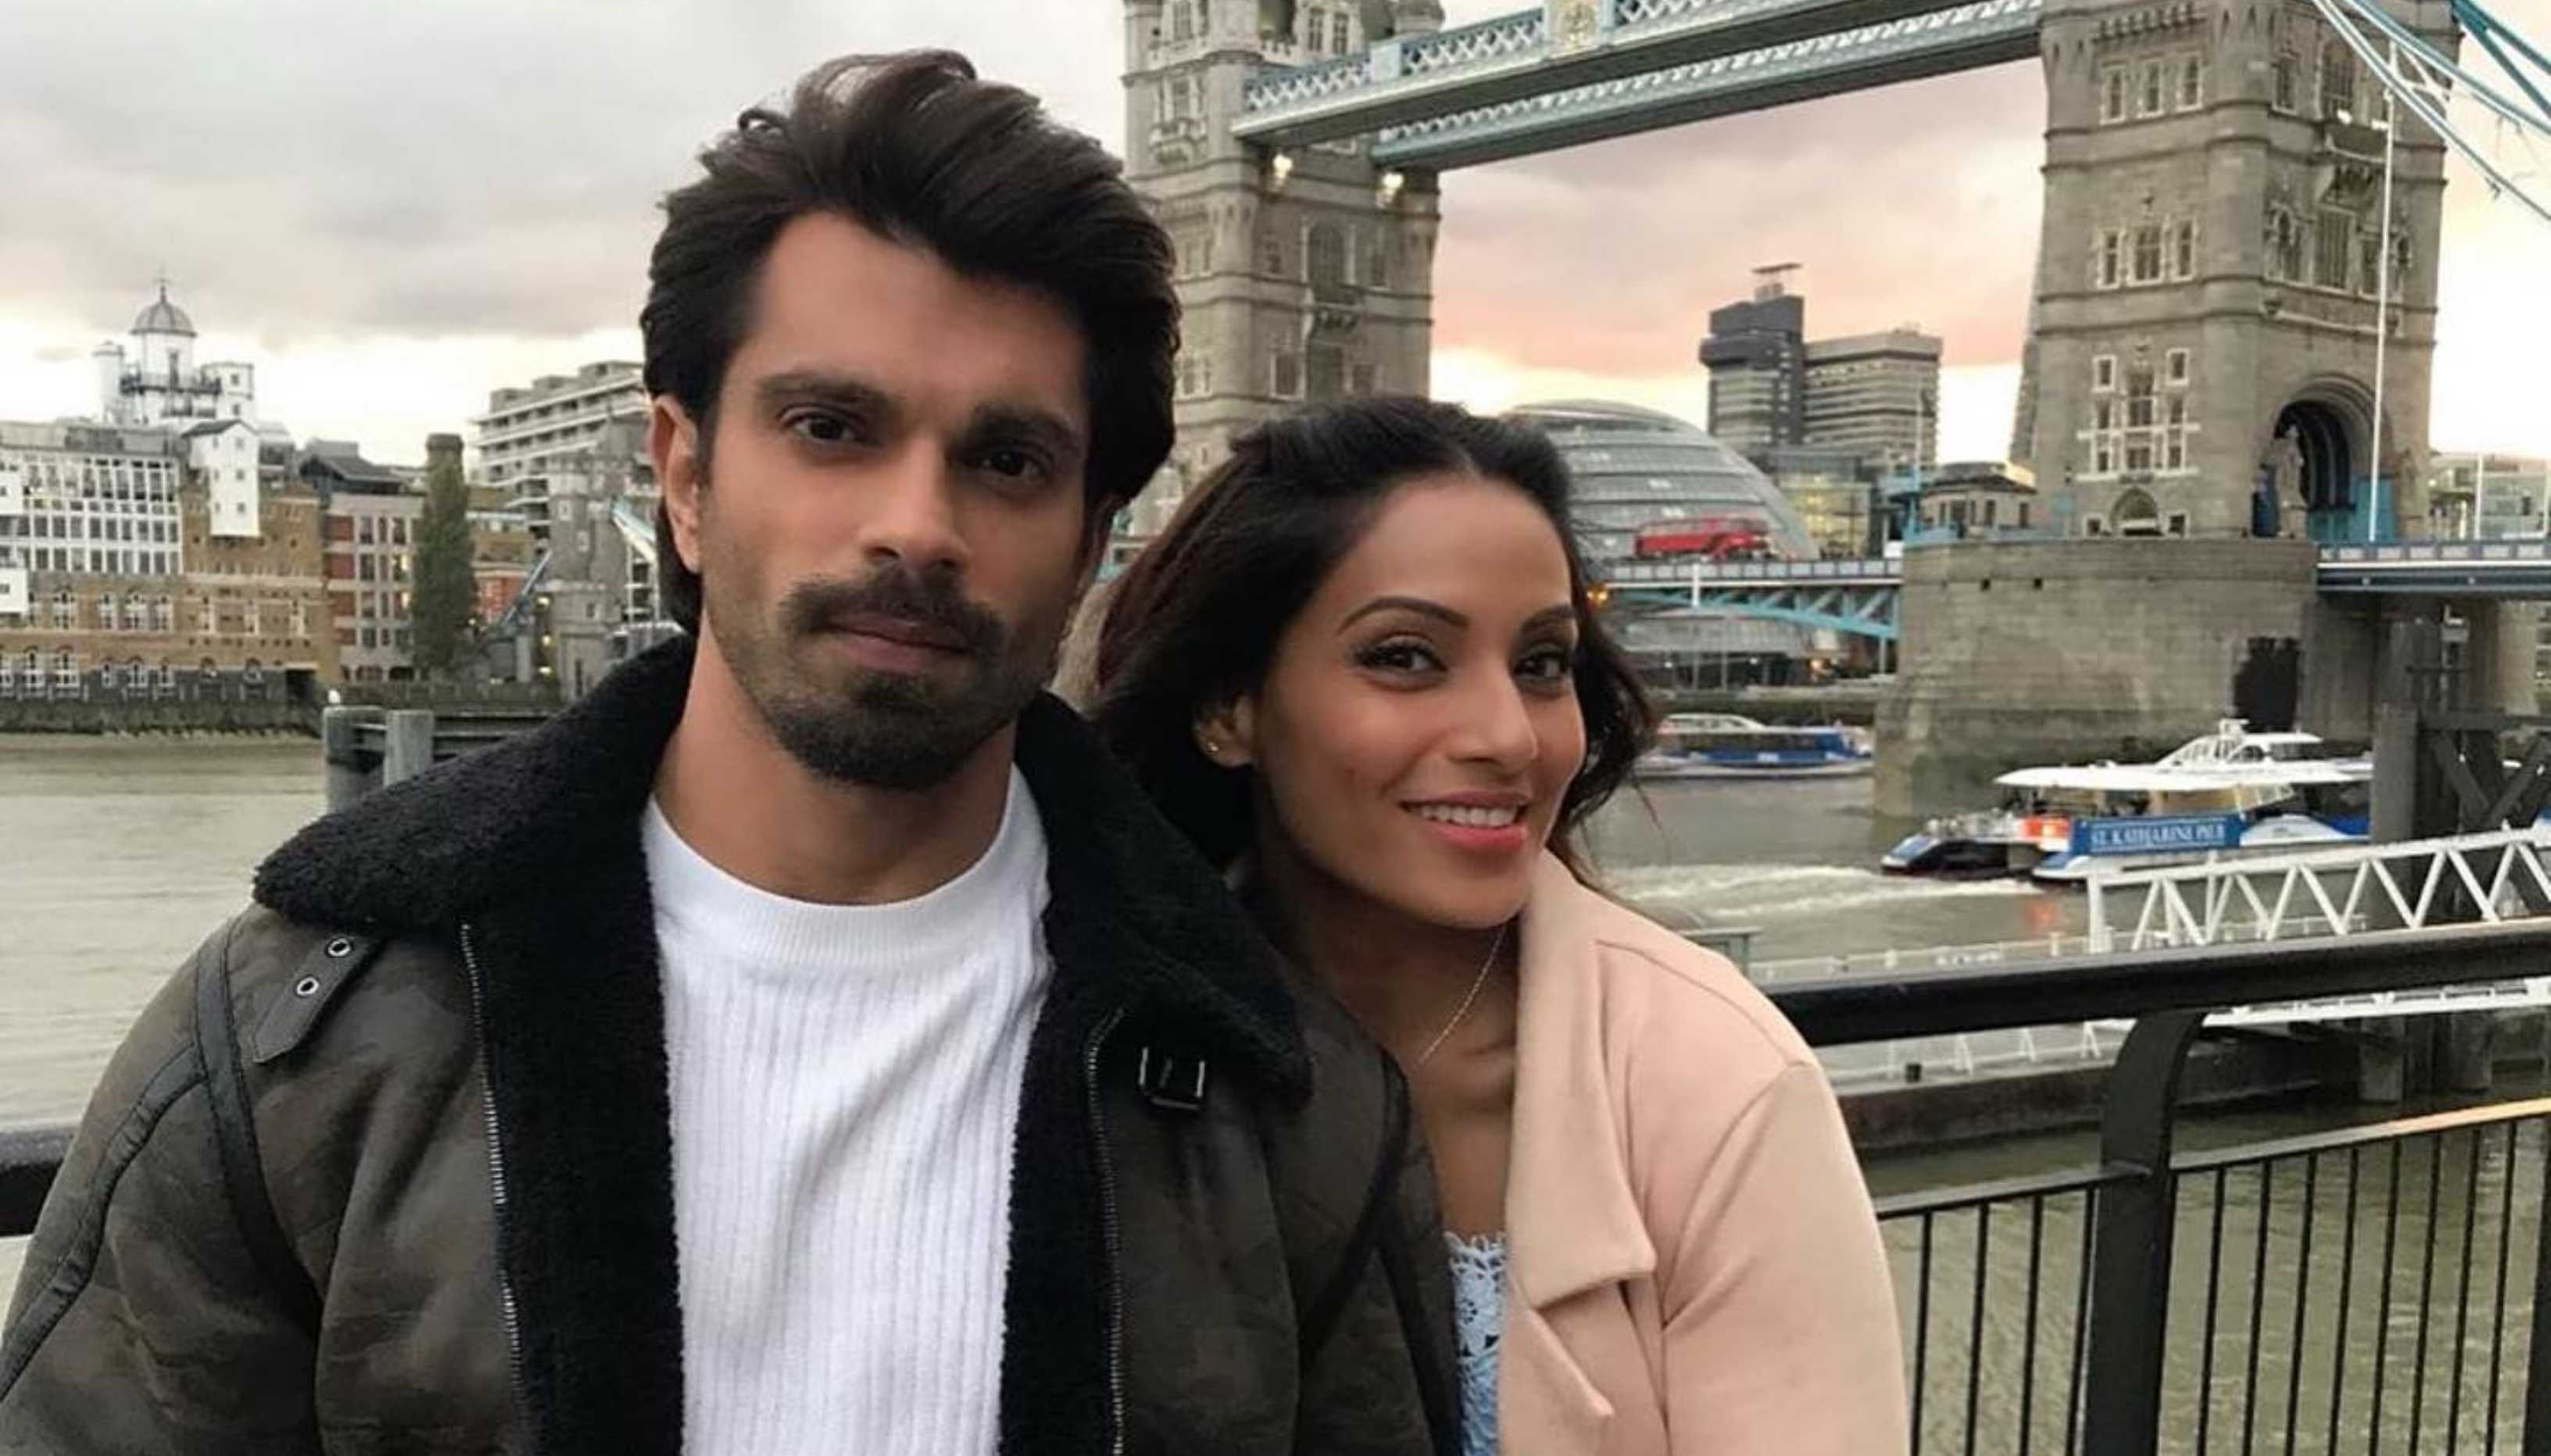 Bipasha Basu and Karan Singh Grover are going to be parents; will share pregnancy announcement soon?